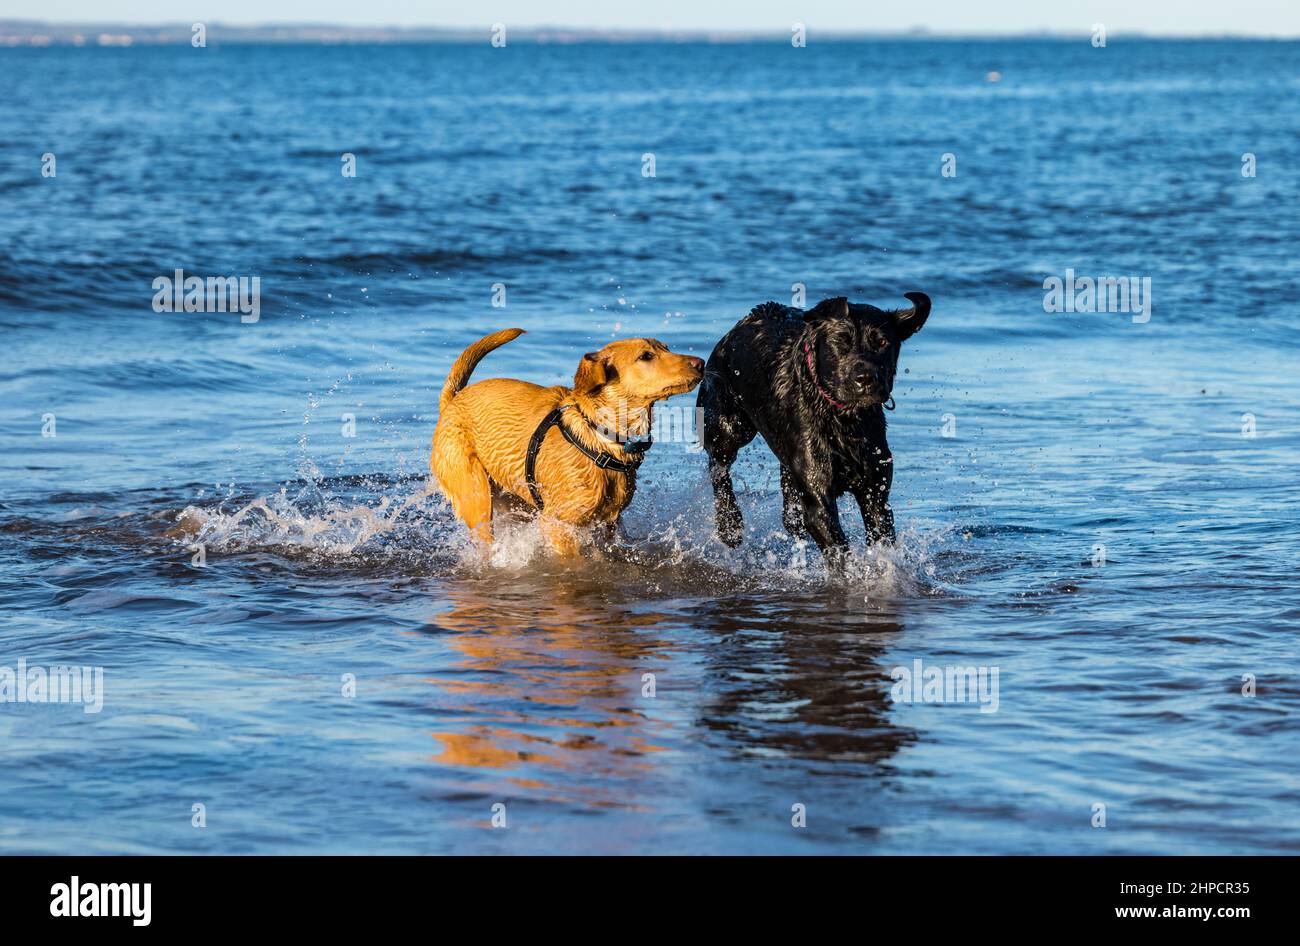 Black and Golden Labrador dog and puppy chasing each other in sea water on sunny day, Scotland, UK Stock Photo